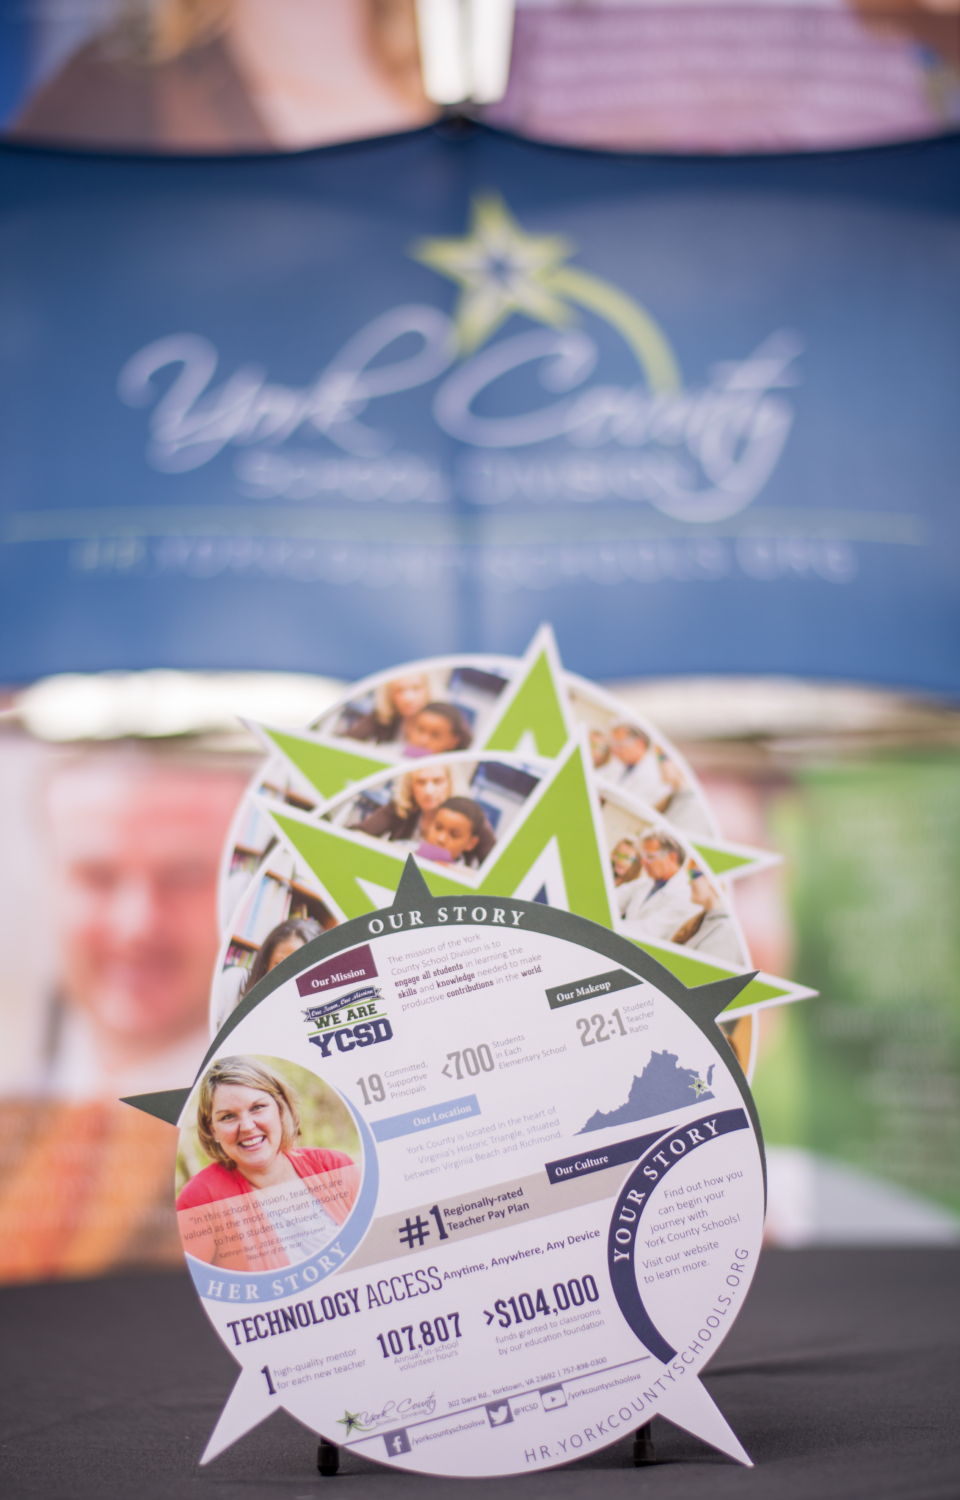 This award-winning campaign utilizes a job fair display, die cut handout, and website to garner more, quality applications for available teaching positions within YCSD. The strategic headers, quotes, and imagery consistently and cohesively touch the four main topics teachers are looking for in a school division: good compensation, helpful and caring administrators, professional development opportunities, and an engaged community.